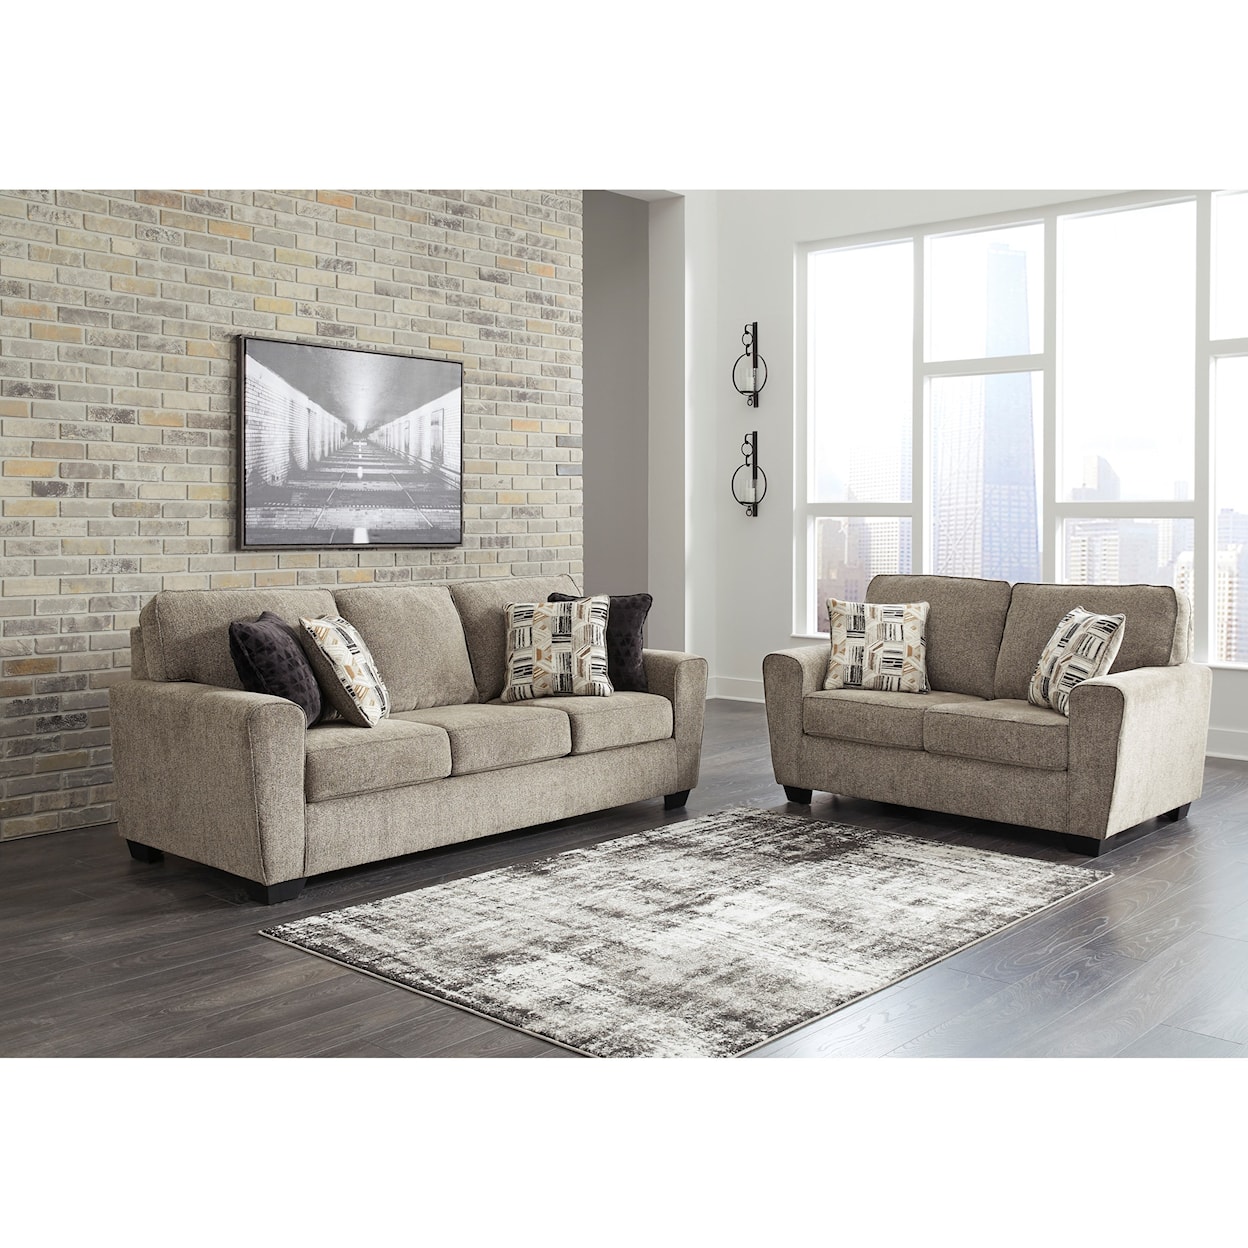 Benchcraft Melody Living Room Group